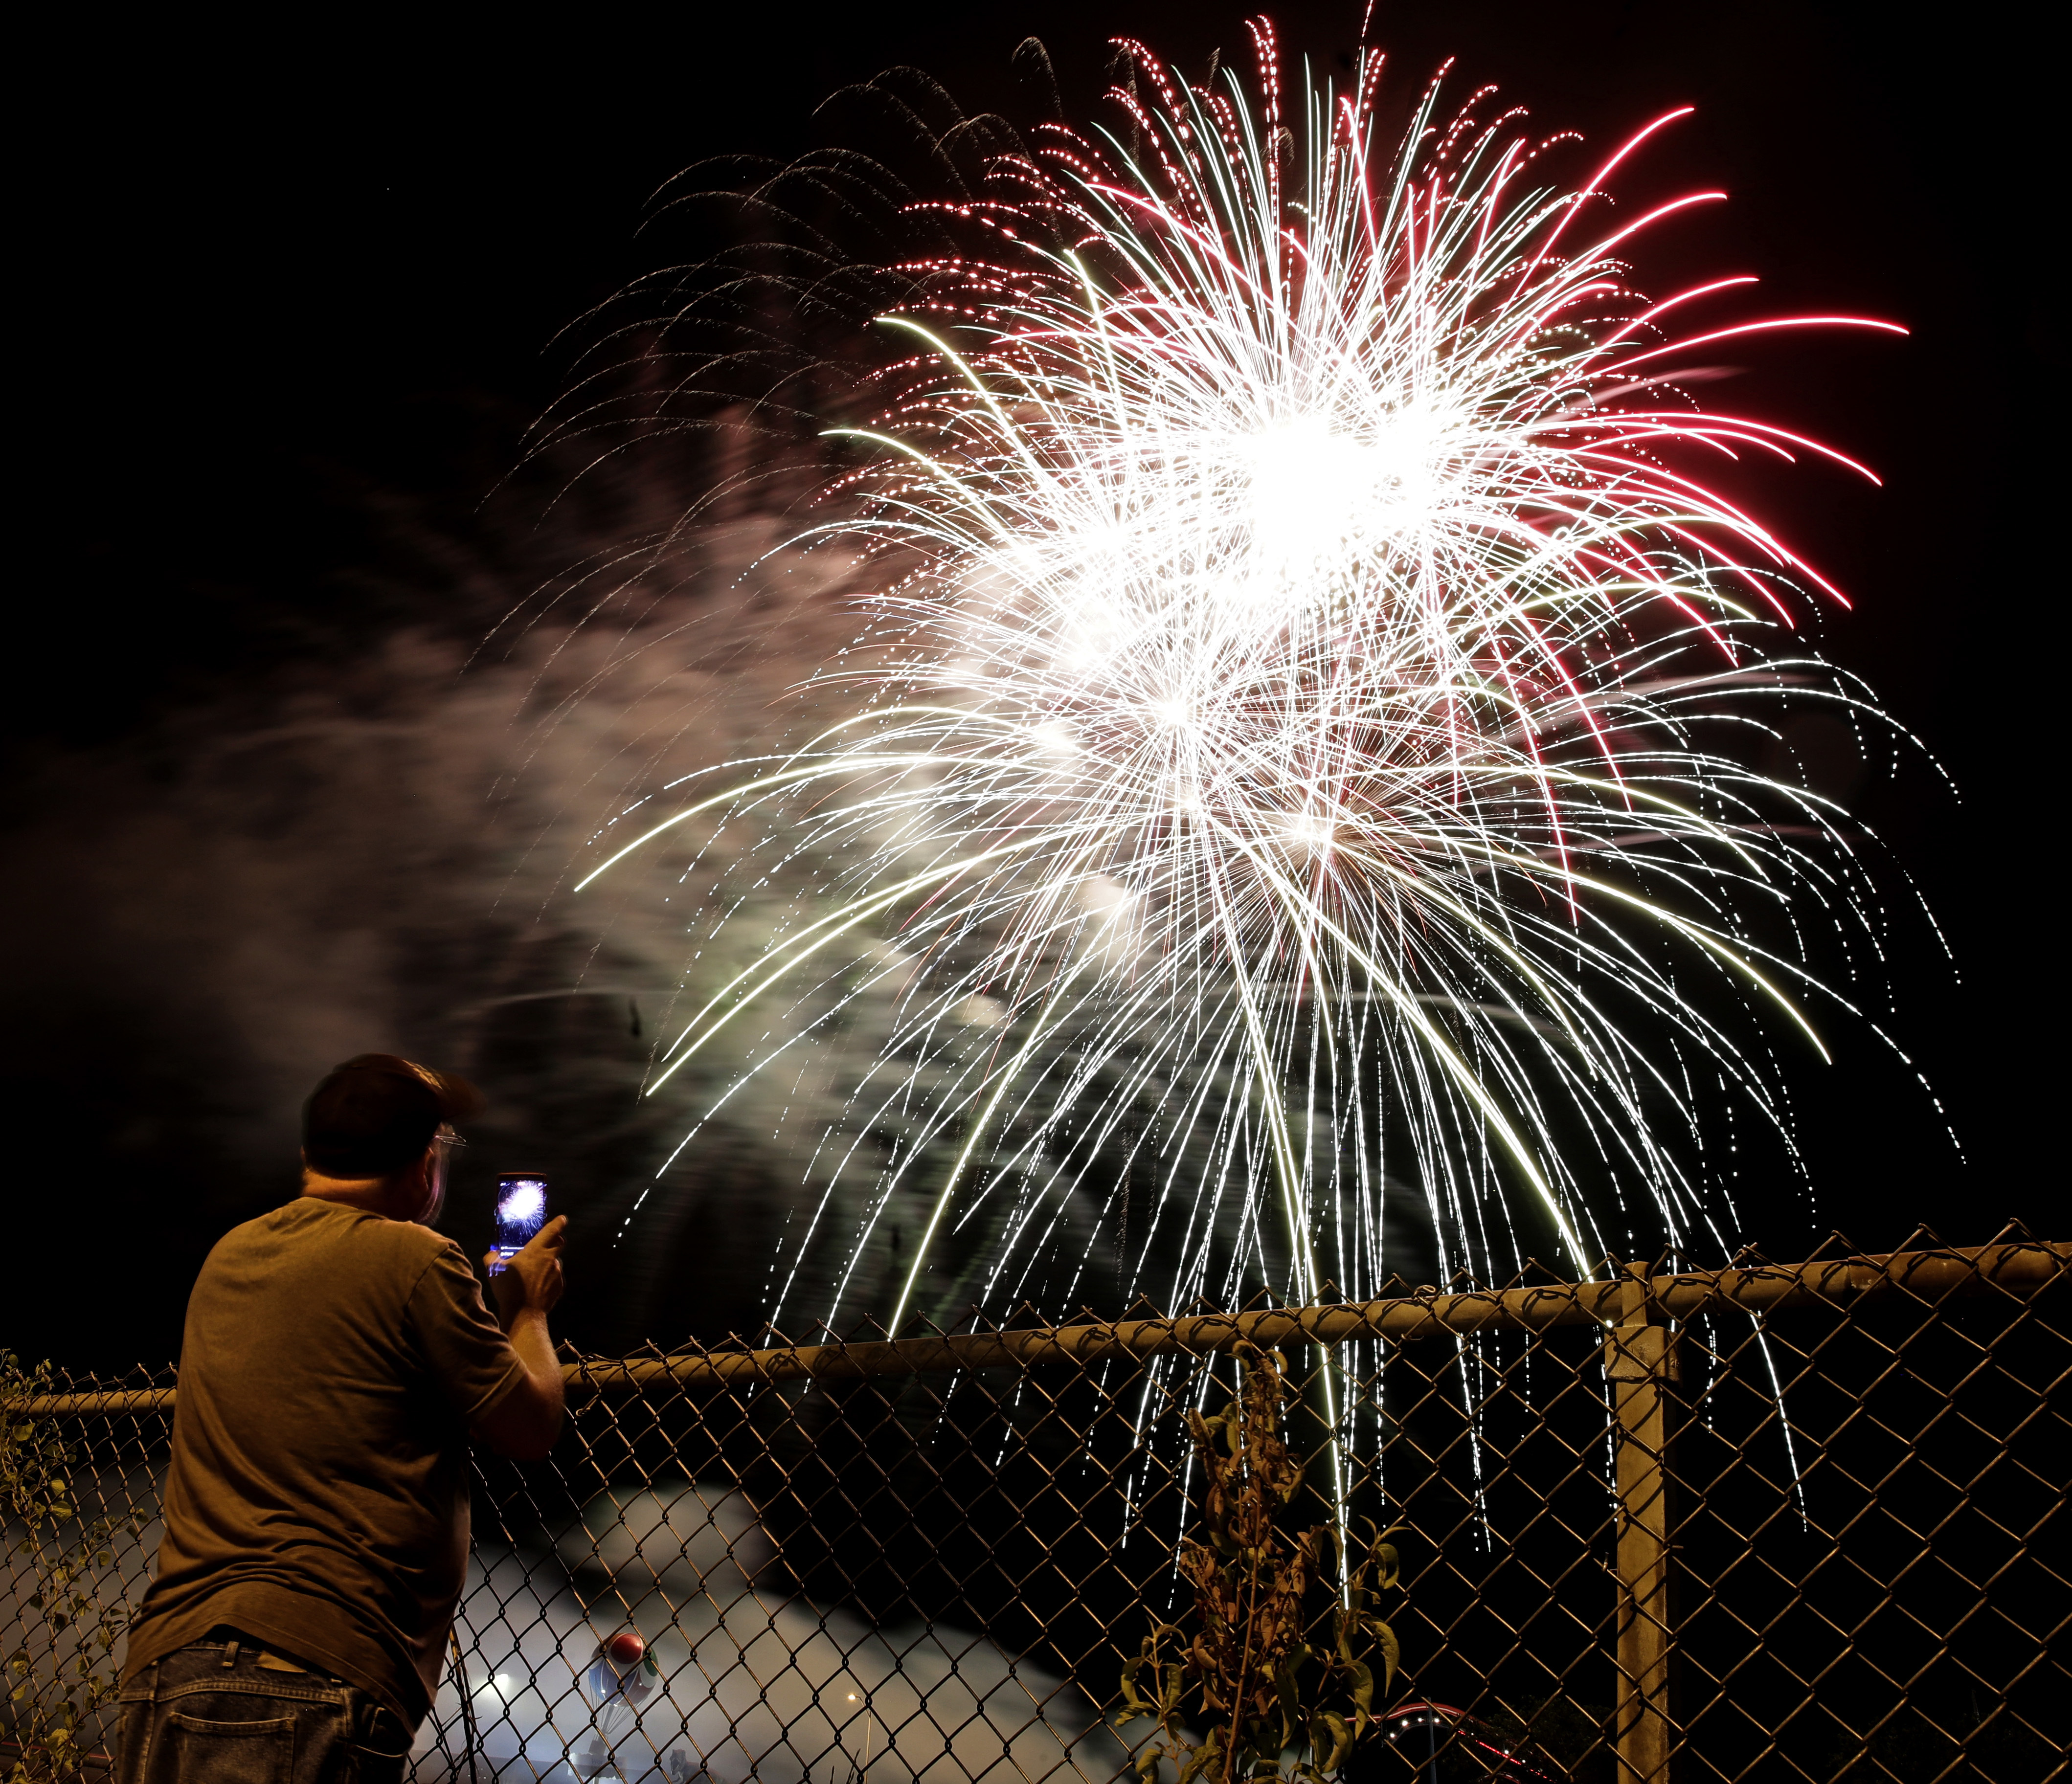 A man watches a fireworks display for Independence Day at Worlds of Fun amusement park Monday, July 3, 2017, in Kansas City, Mo. (AP Photo/Charlie Riedel)